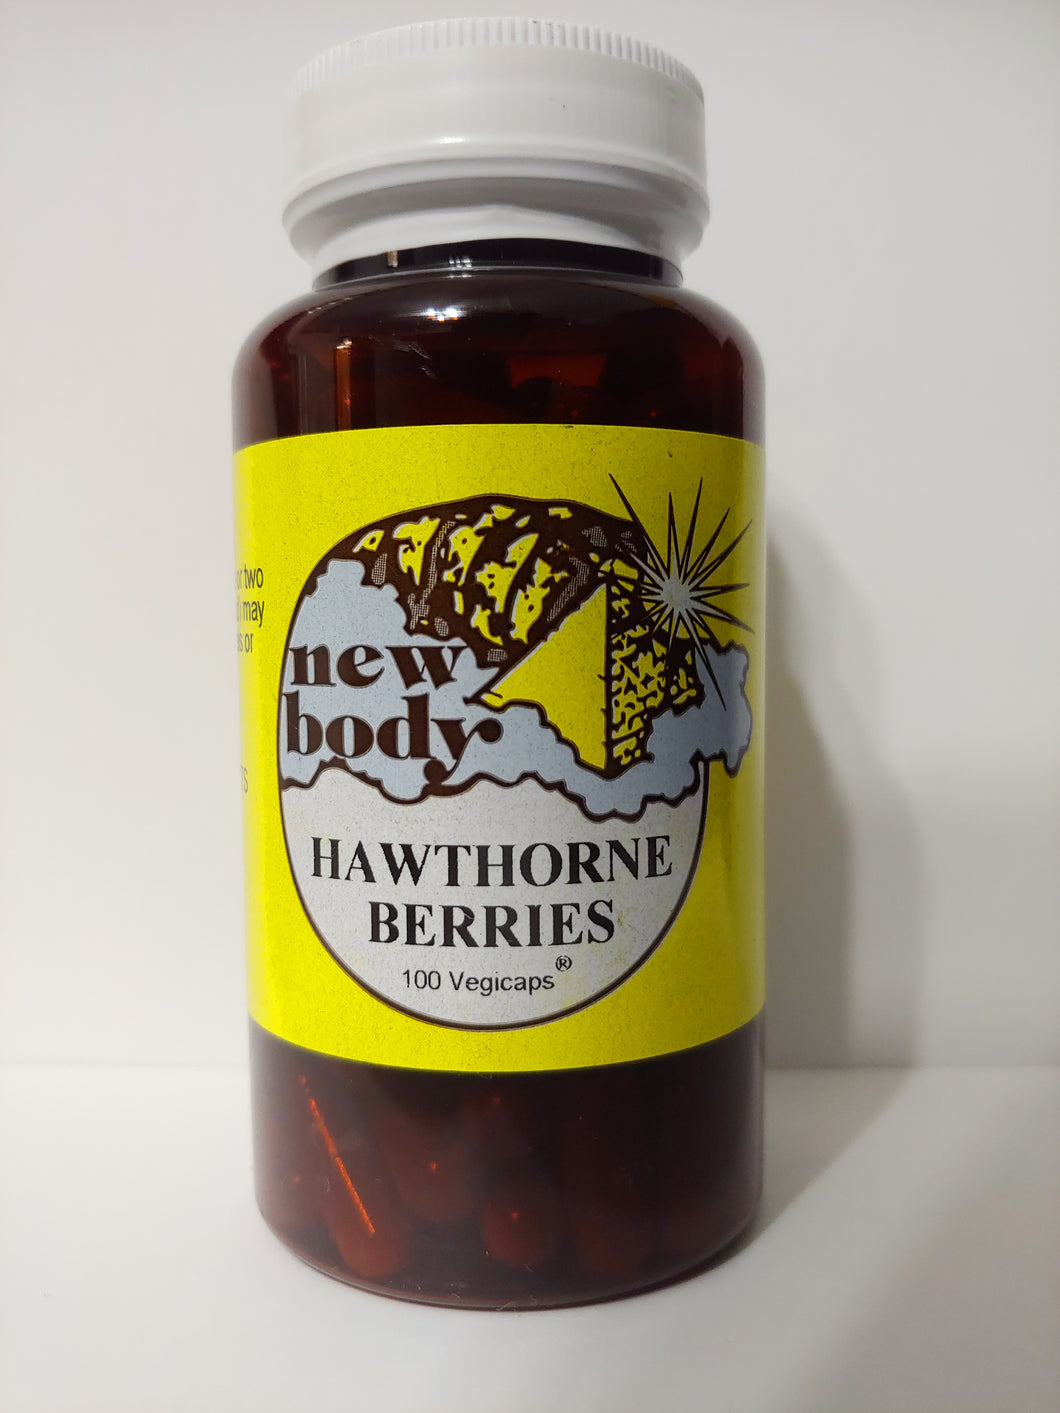 New Body Products Hawthorn Berries 100 Vegicaps This Product Contains No Fillers, Binders, or Additives